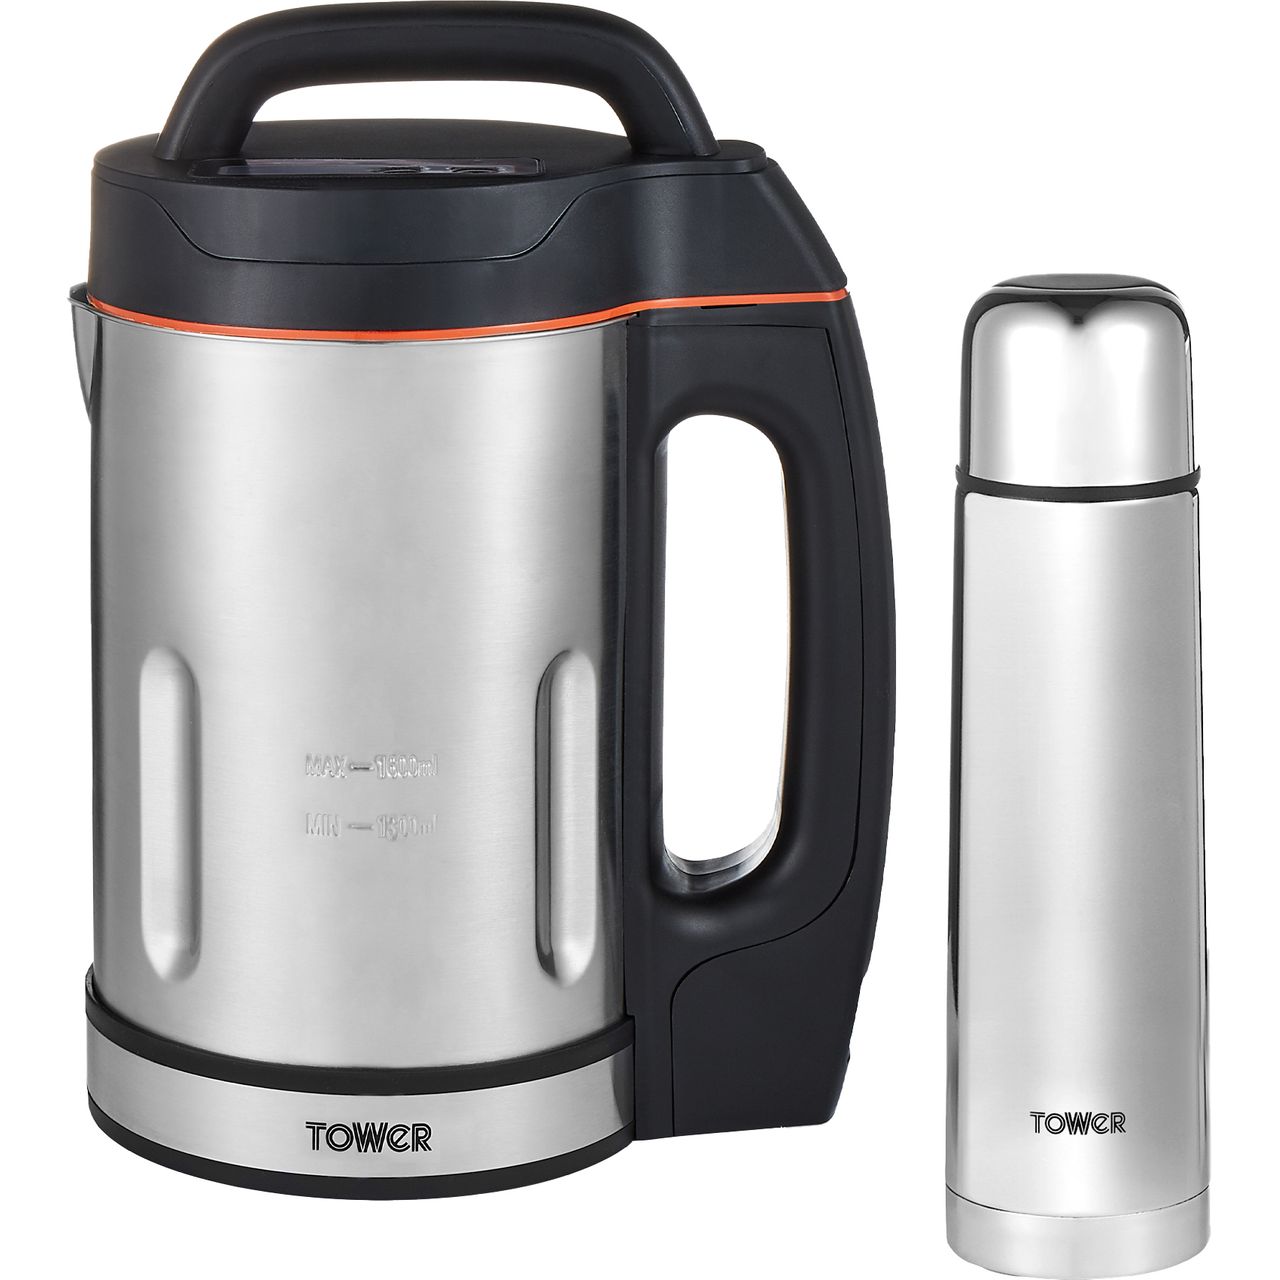 Tower T12055BF 1.6 Litre Soup Maker Review